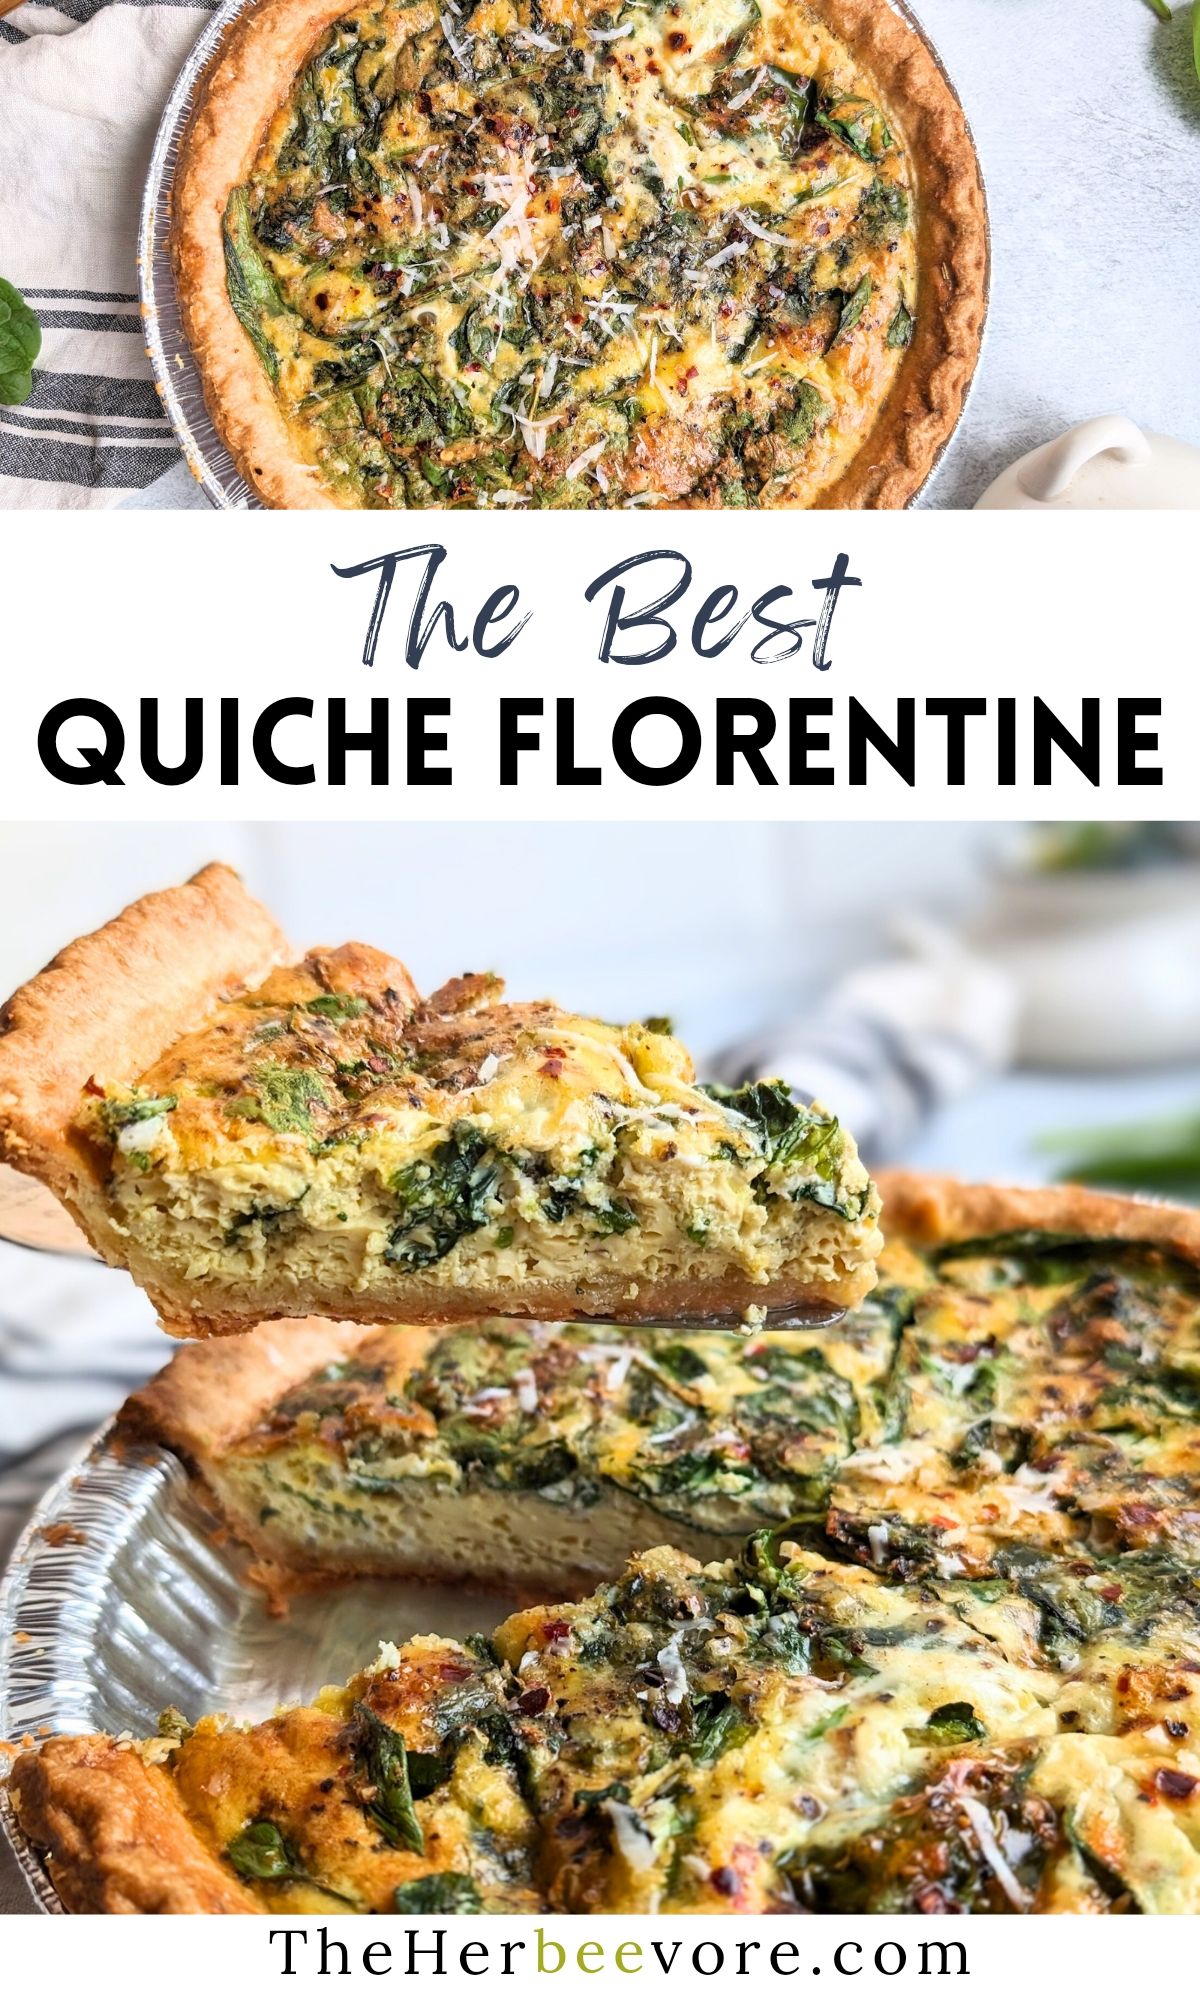 quiche florentine recipe with eggs spinach and cheese recipes fancy meatless meals easy brunch recipes without meat